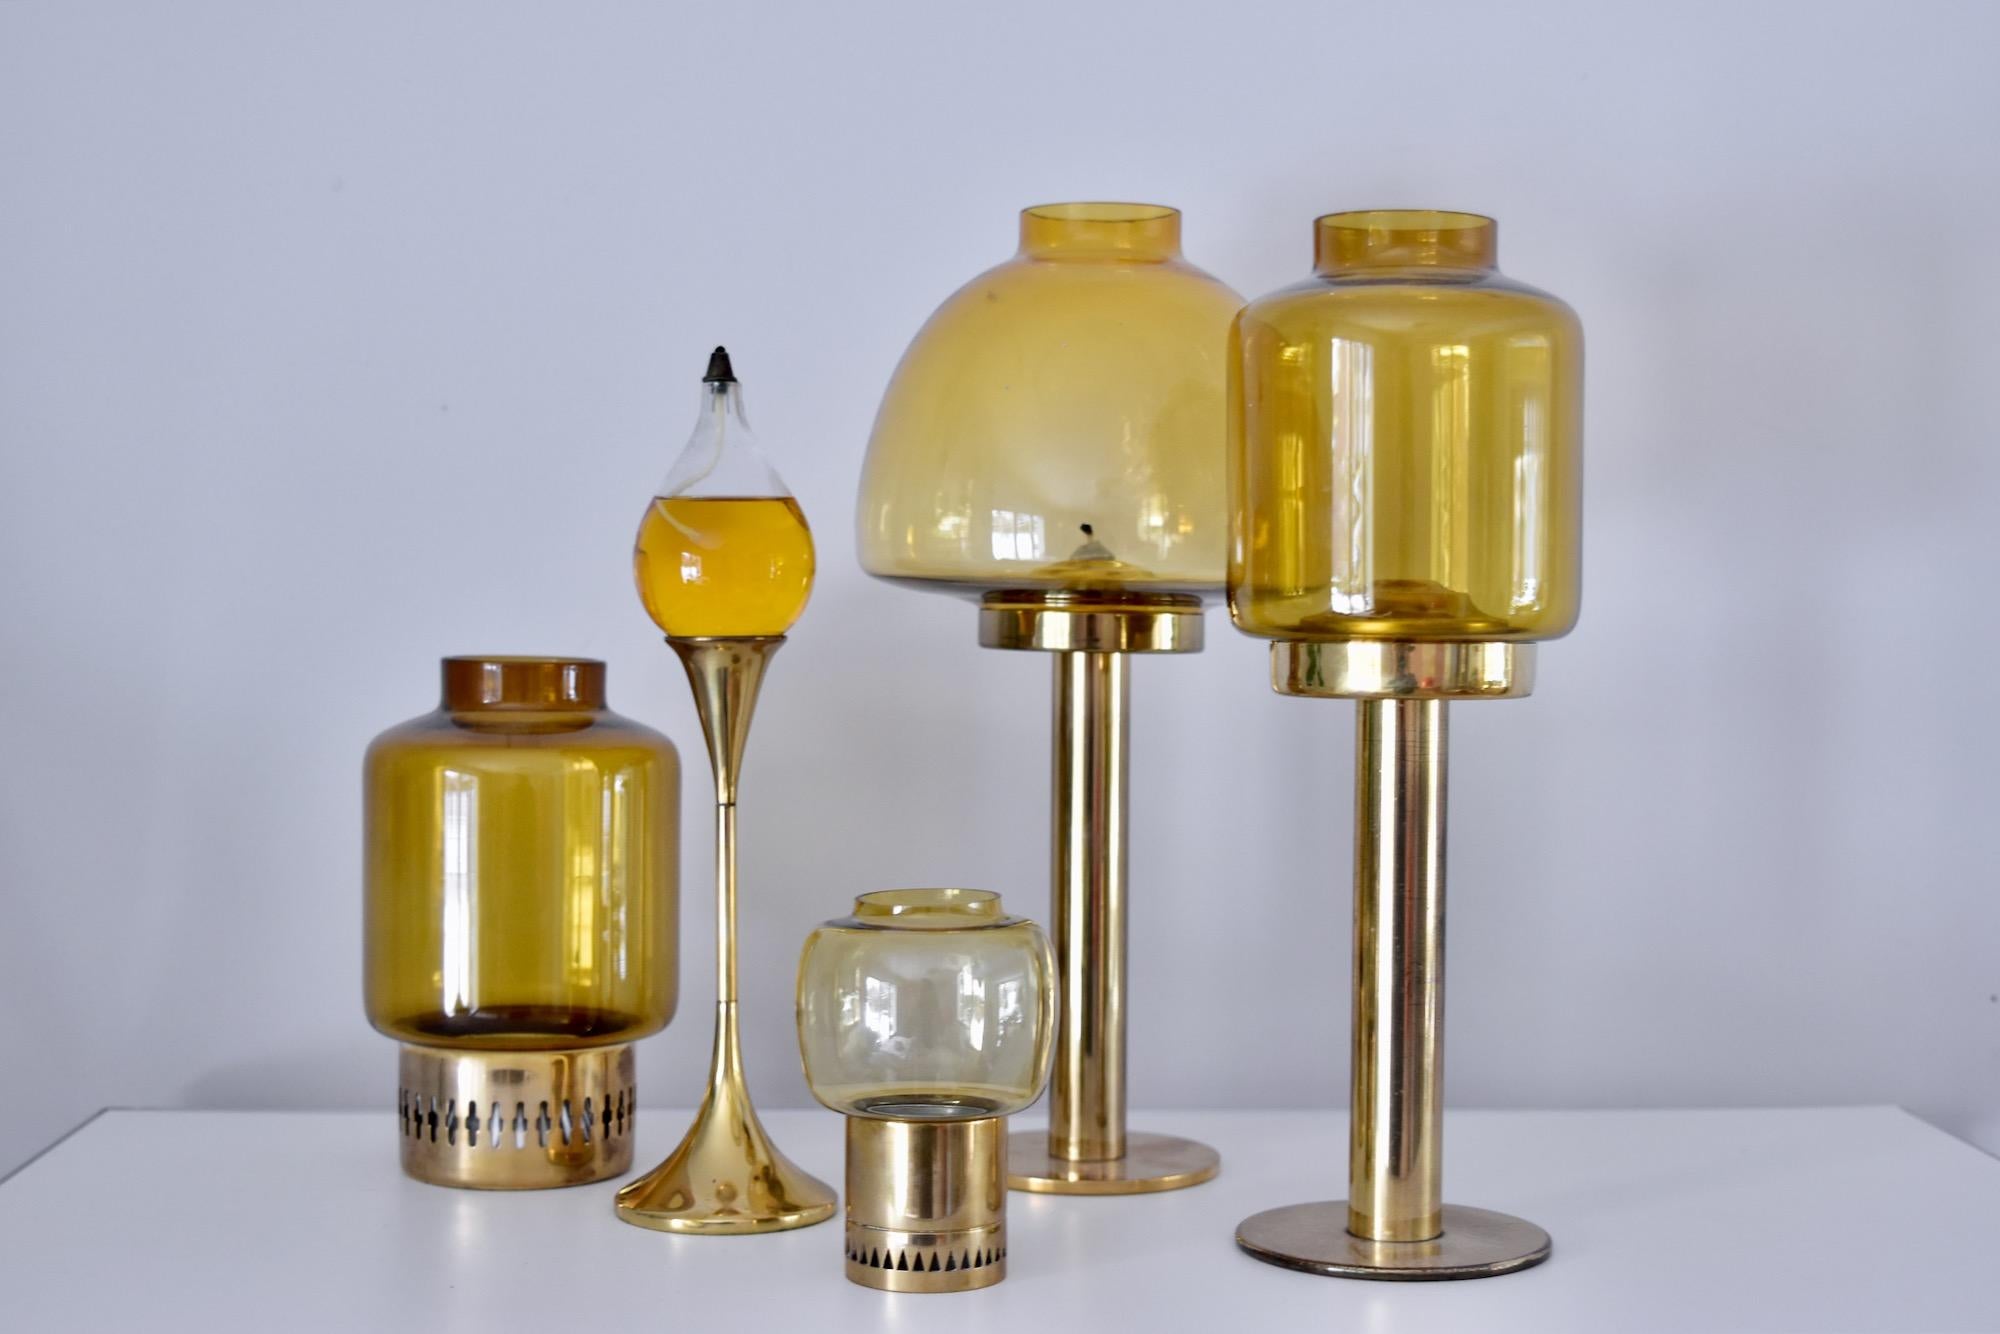 Beautiful candlesticks by Hans-Agne Jakobsson.
Measurements: diameter 8cm, height 12cm
Yellow glass and brass base.
Very nice condition. Price for one candleholder.

 